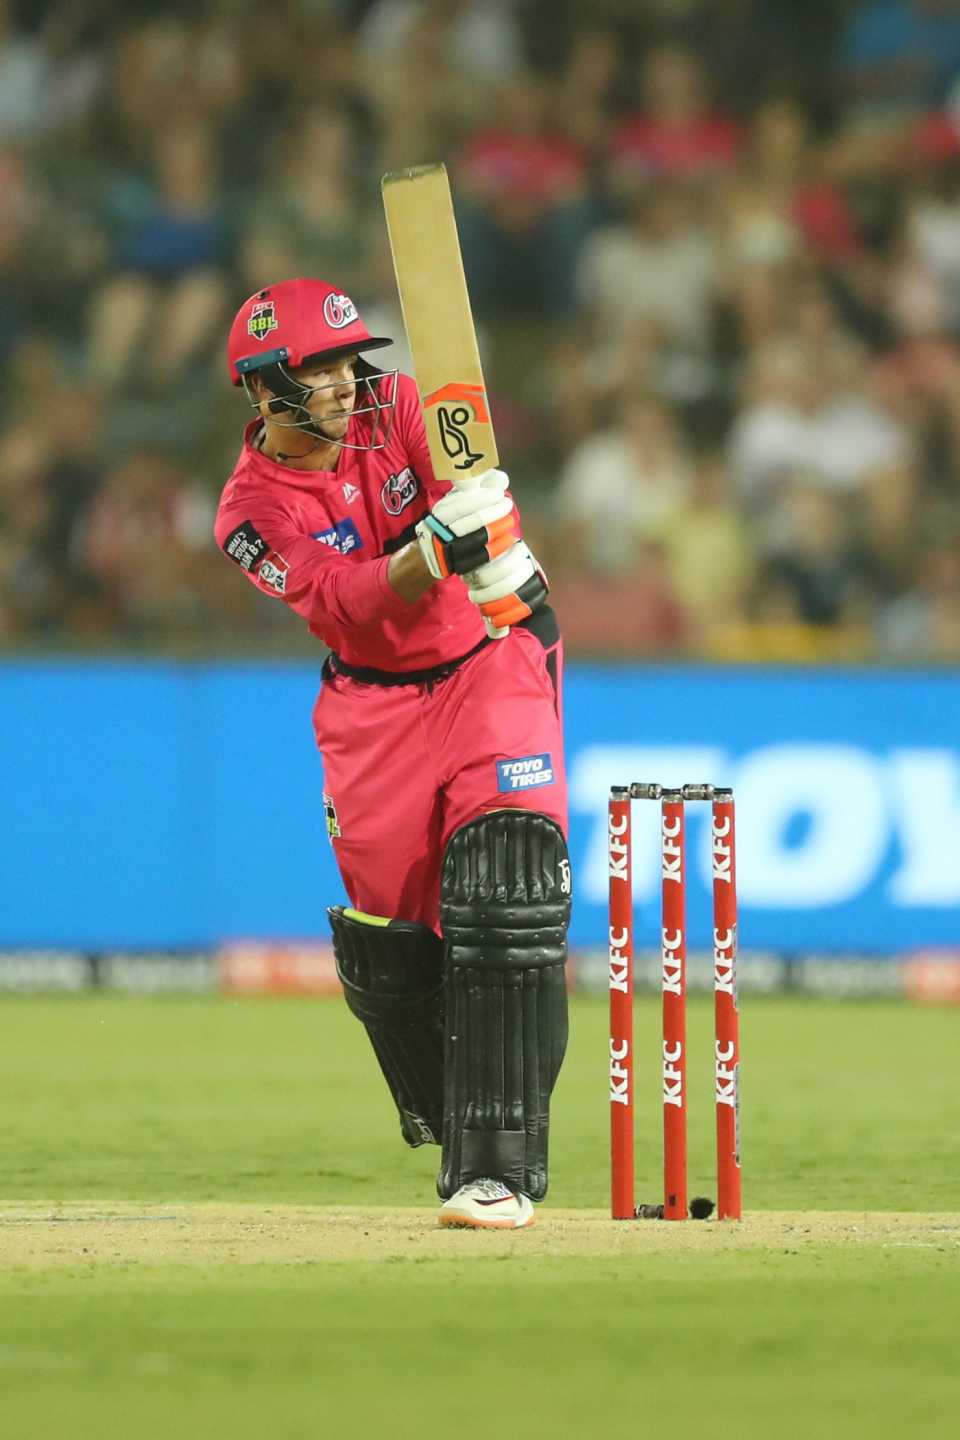 Josh Philippe led the Sixers chase with a 52-ball 83*